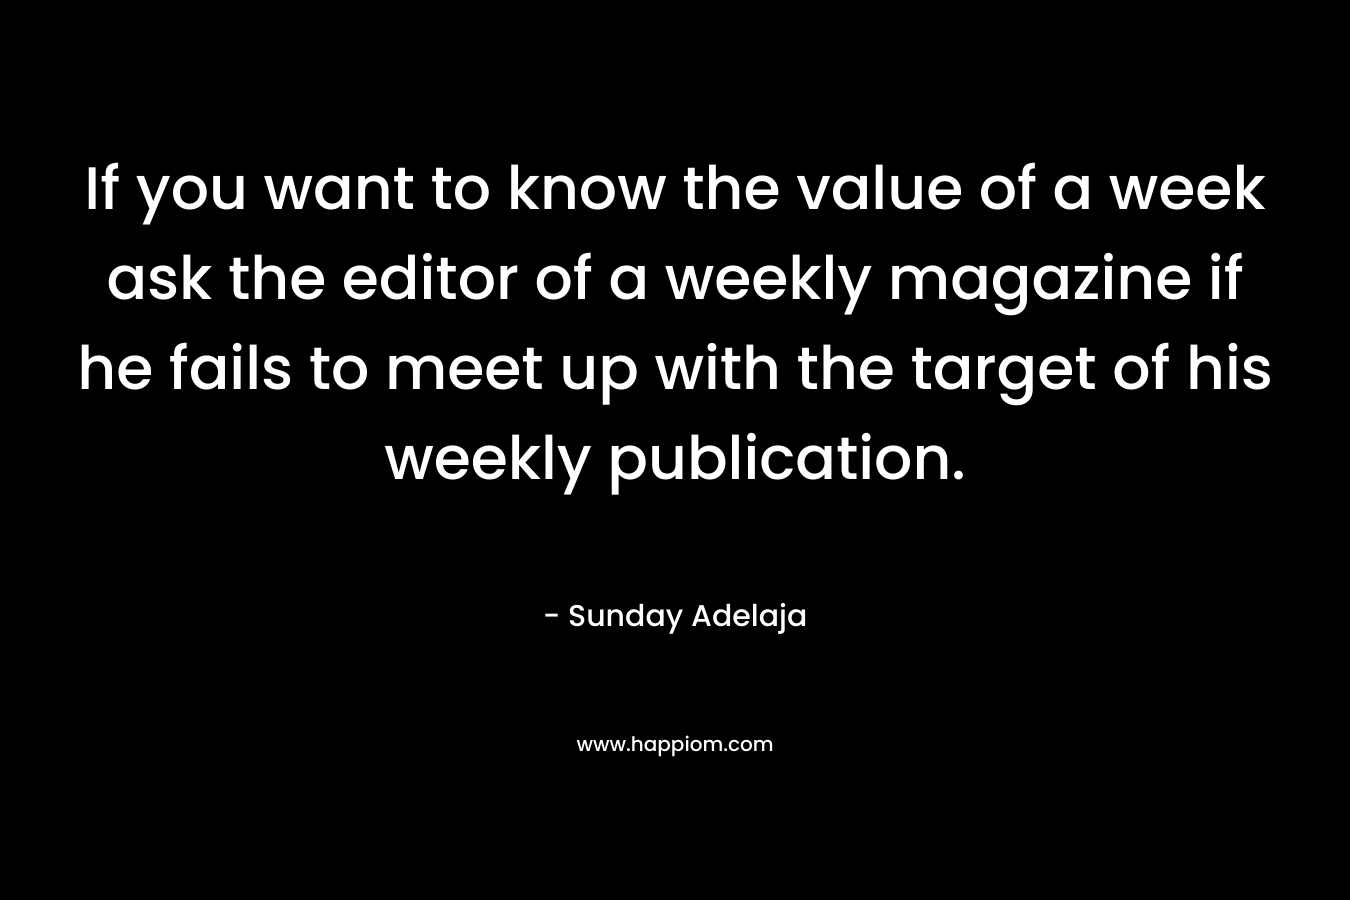 If you want to know the value of a week ask the editor of a weekly magazine if he fails to meet up with the target of his weekly publication. – Sunday Adelaja